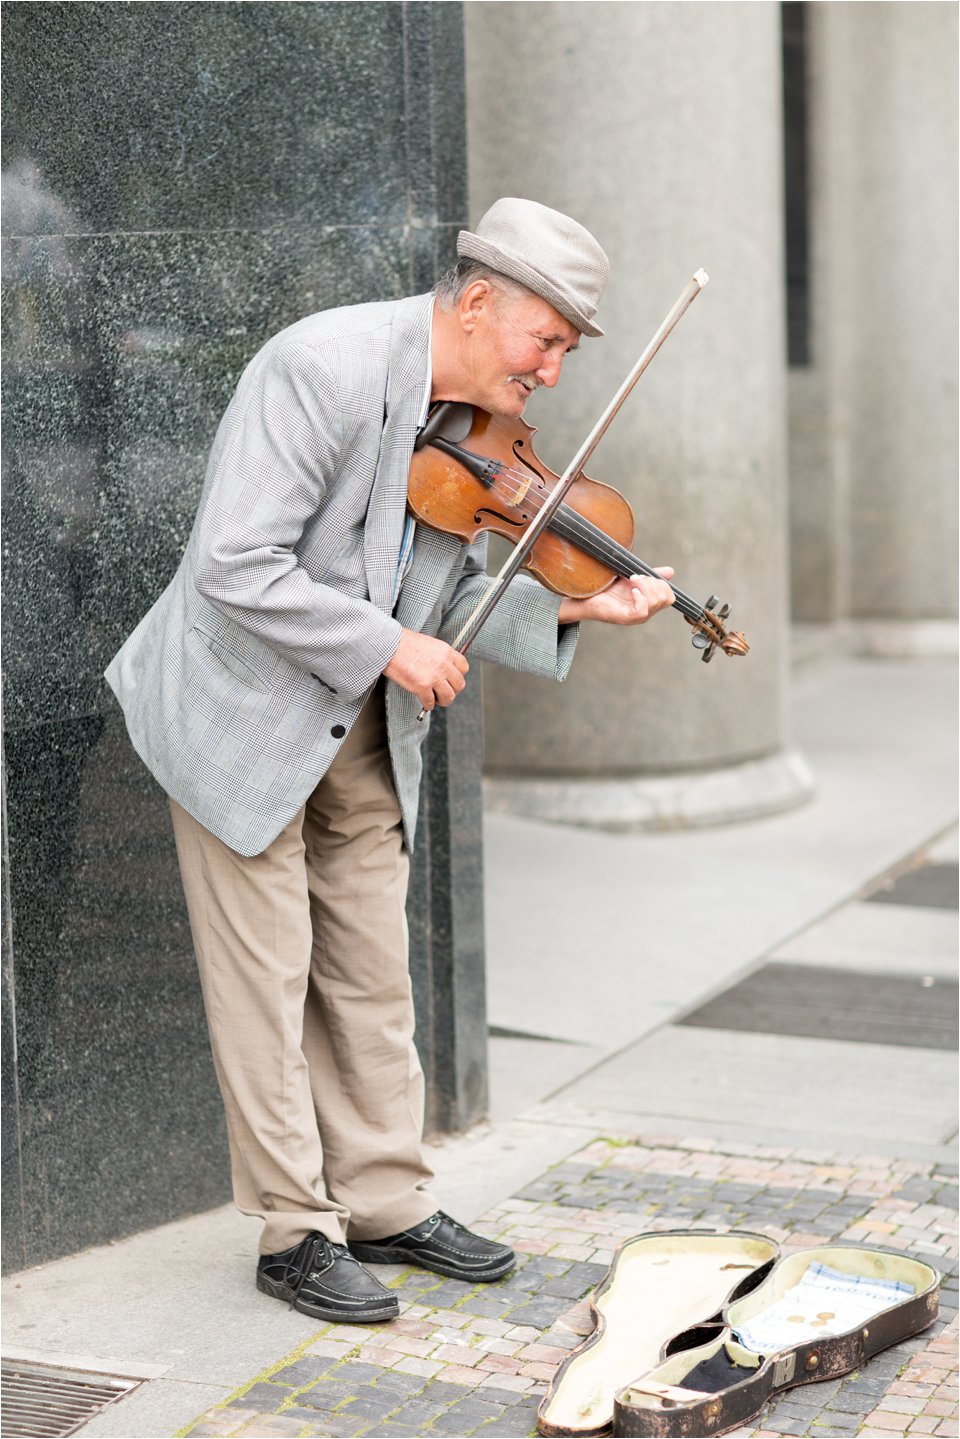 Violinist in Wenceslas Square (C) Maundy Mitchell